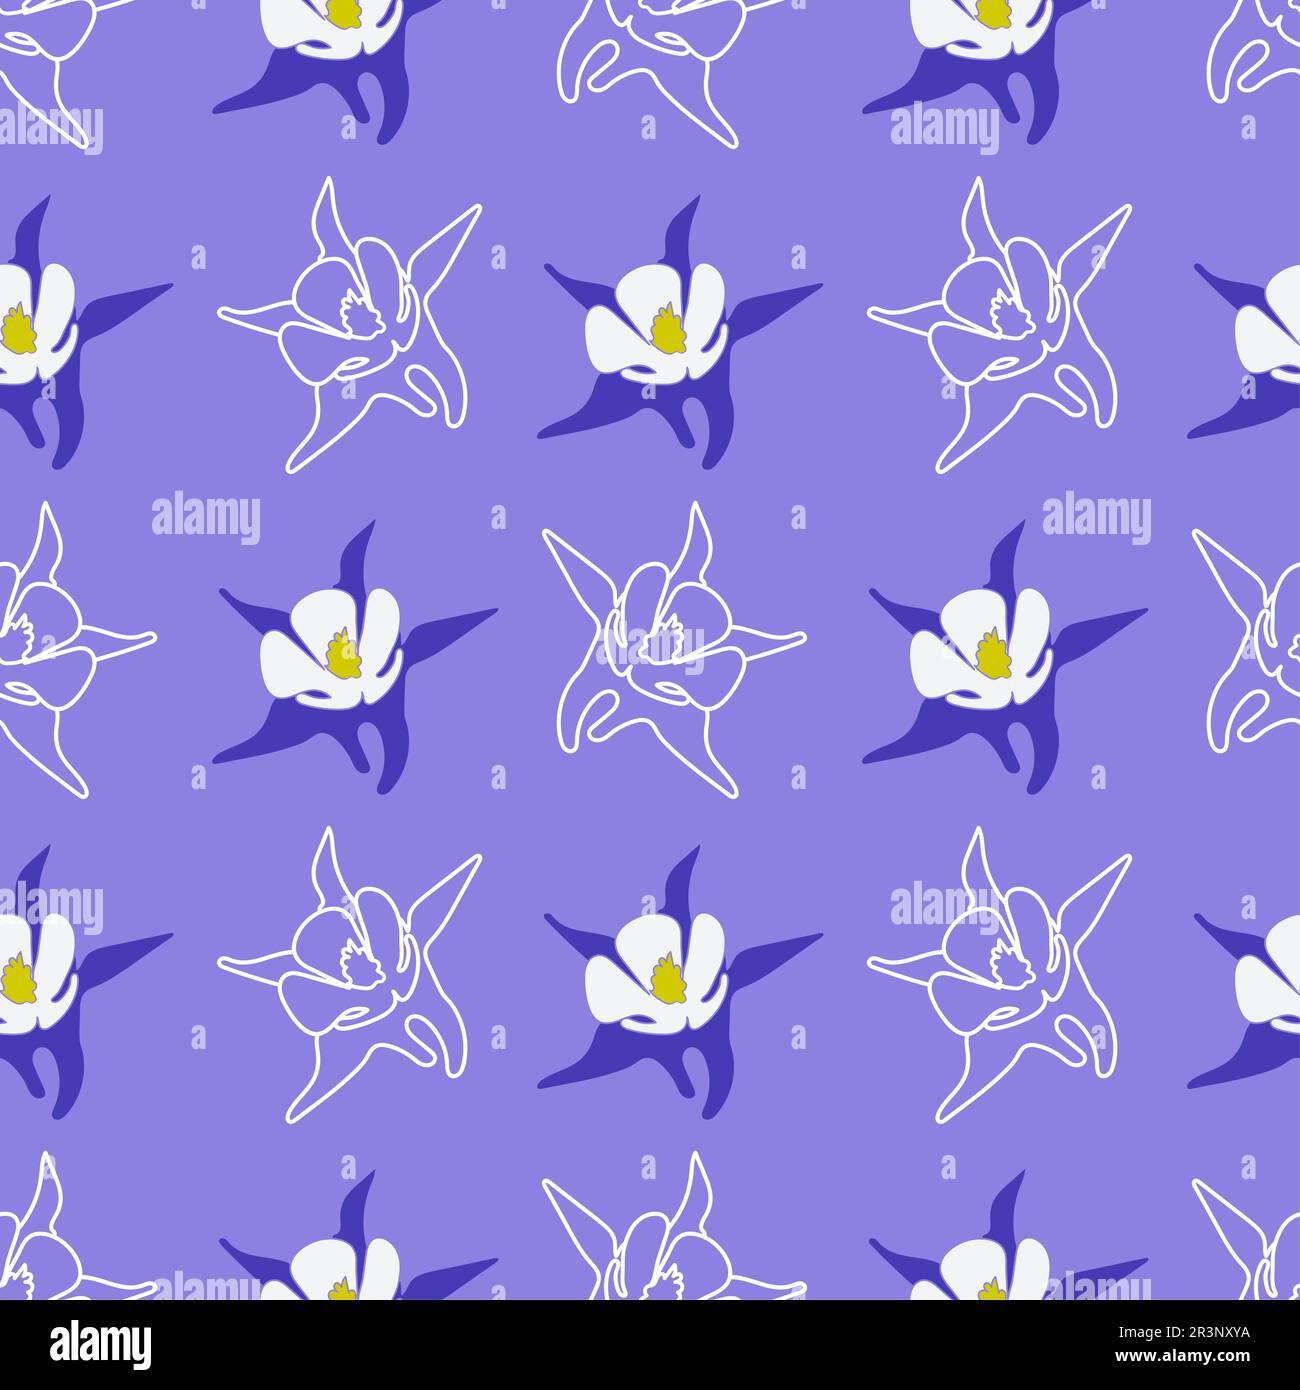 Seamless blue star flower background. repeat pattern background design Stock Photo